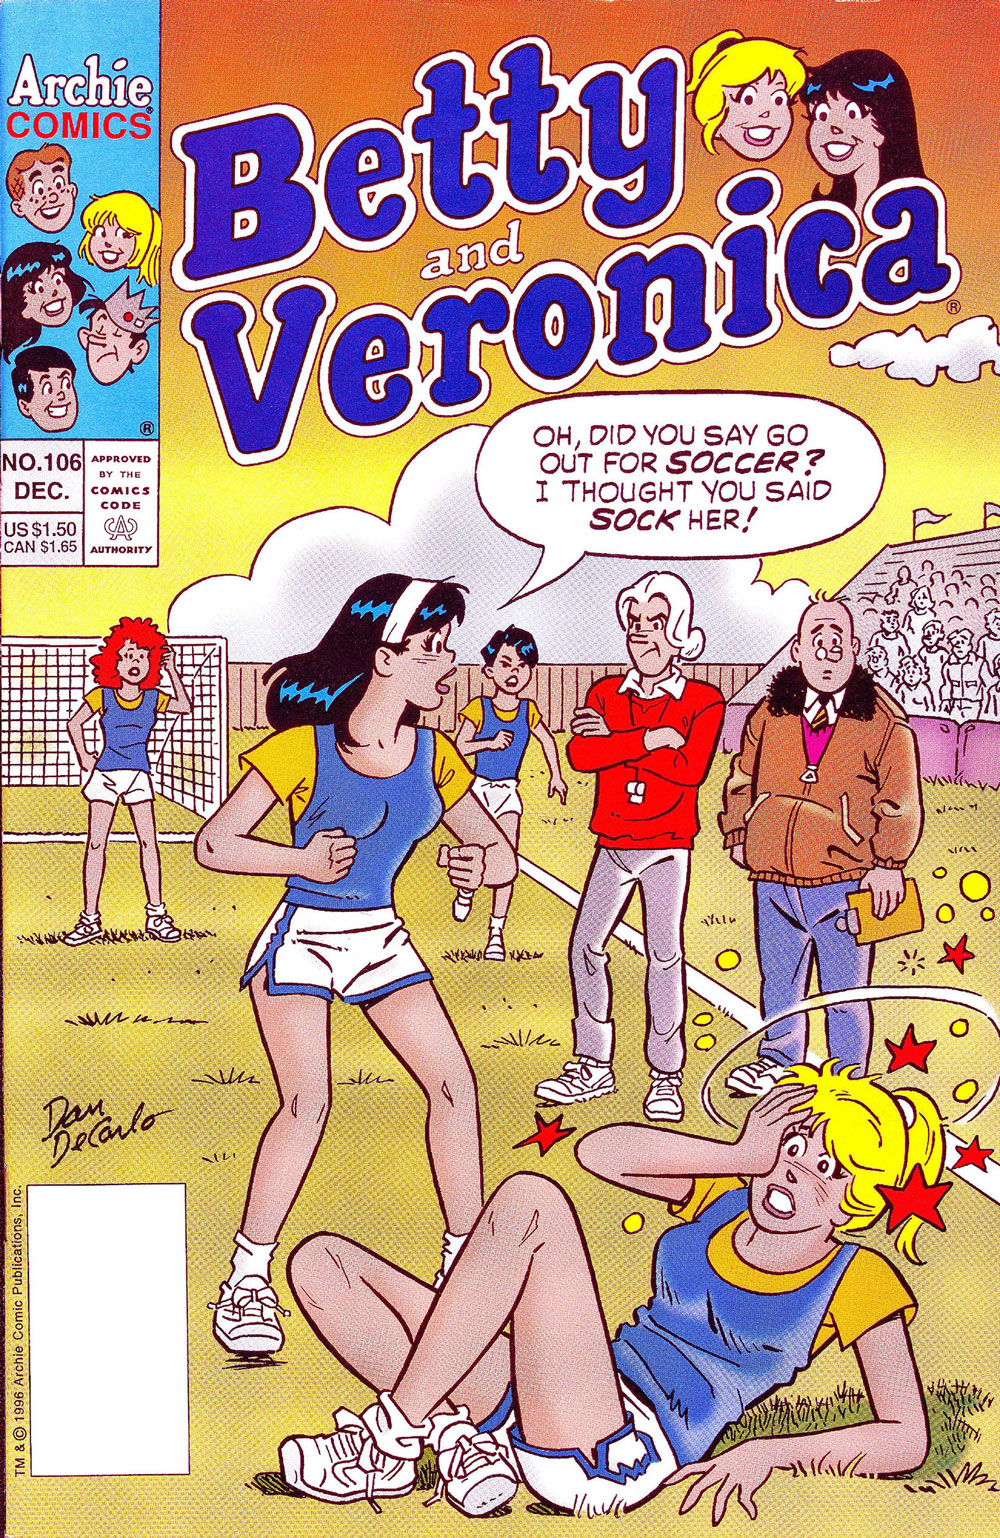 Cover of BETTY AND VERONICA #106. Veronica has just punched Betty on the soccer field. She says, "Did you say go out for soccer? I thought you said sock her!"